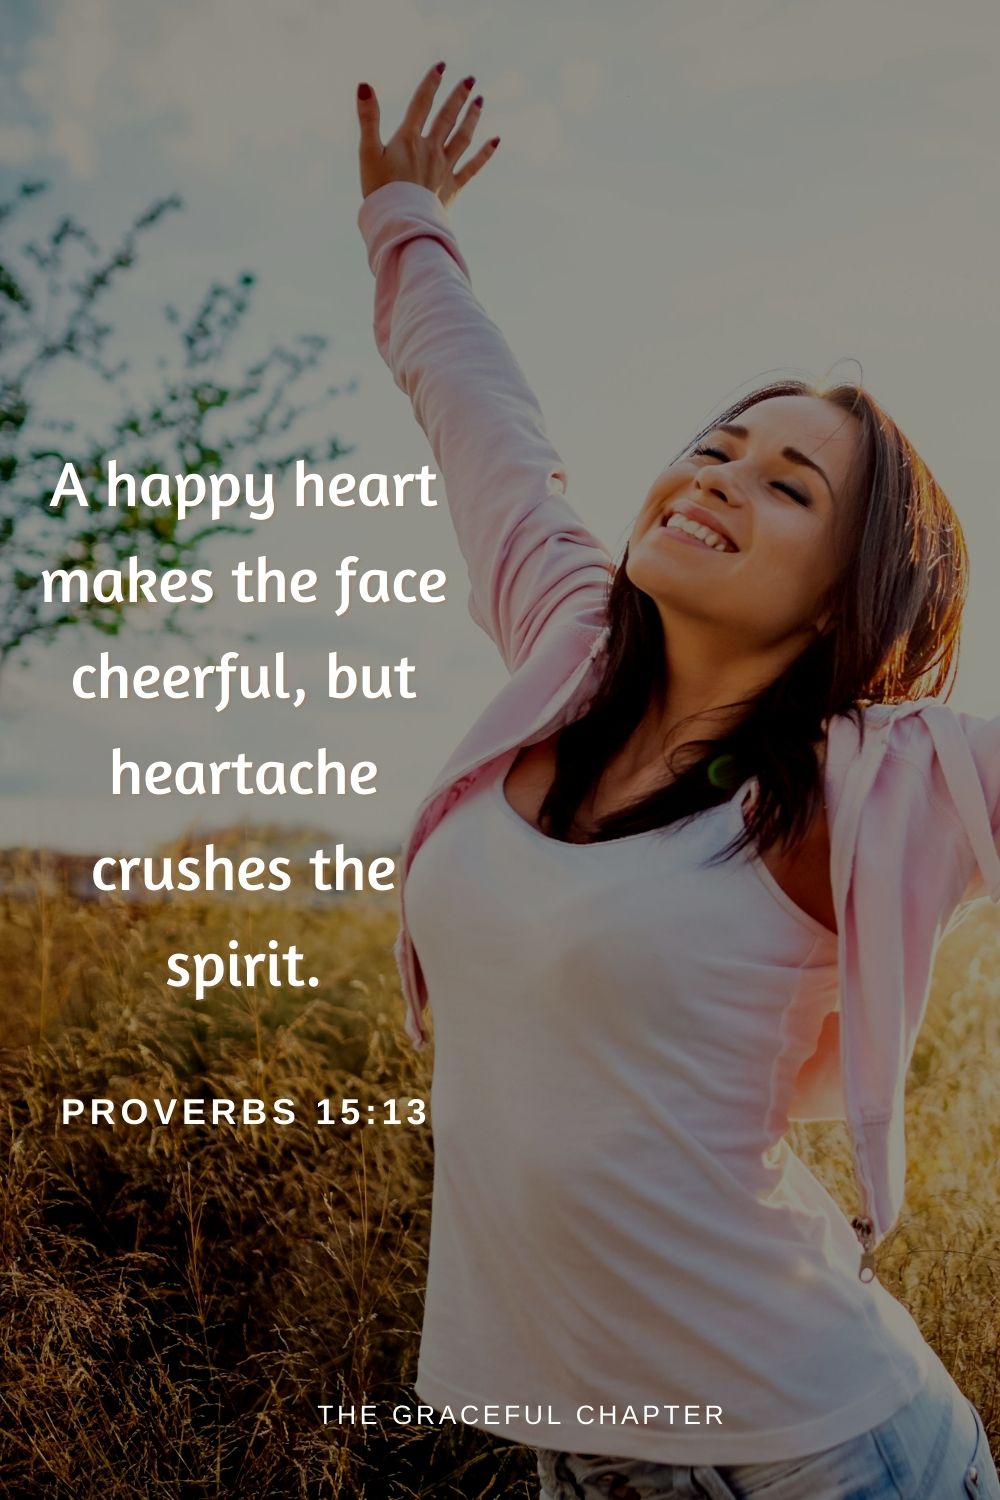 A happy heart makes the face cheerful, but heartache crushes the spirit.